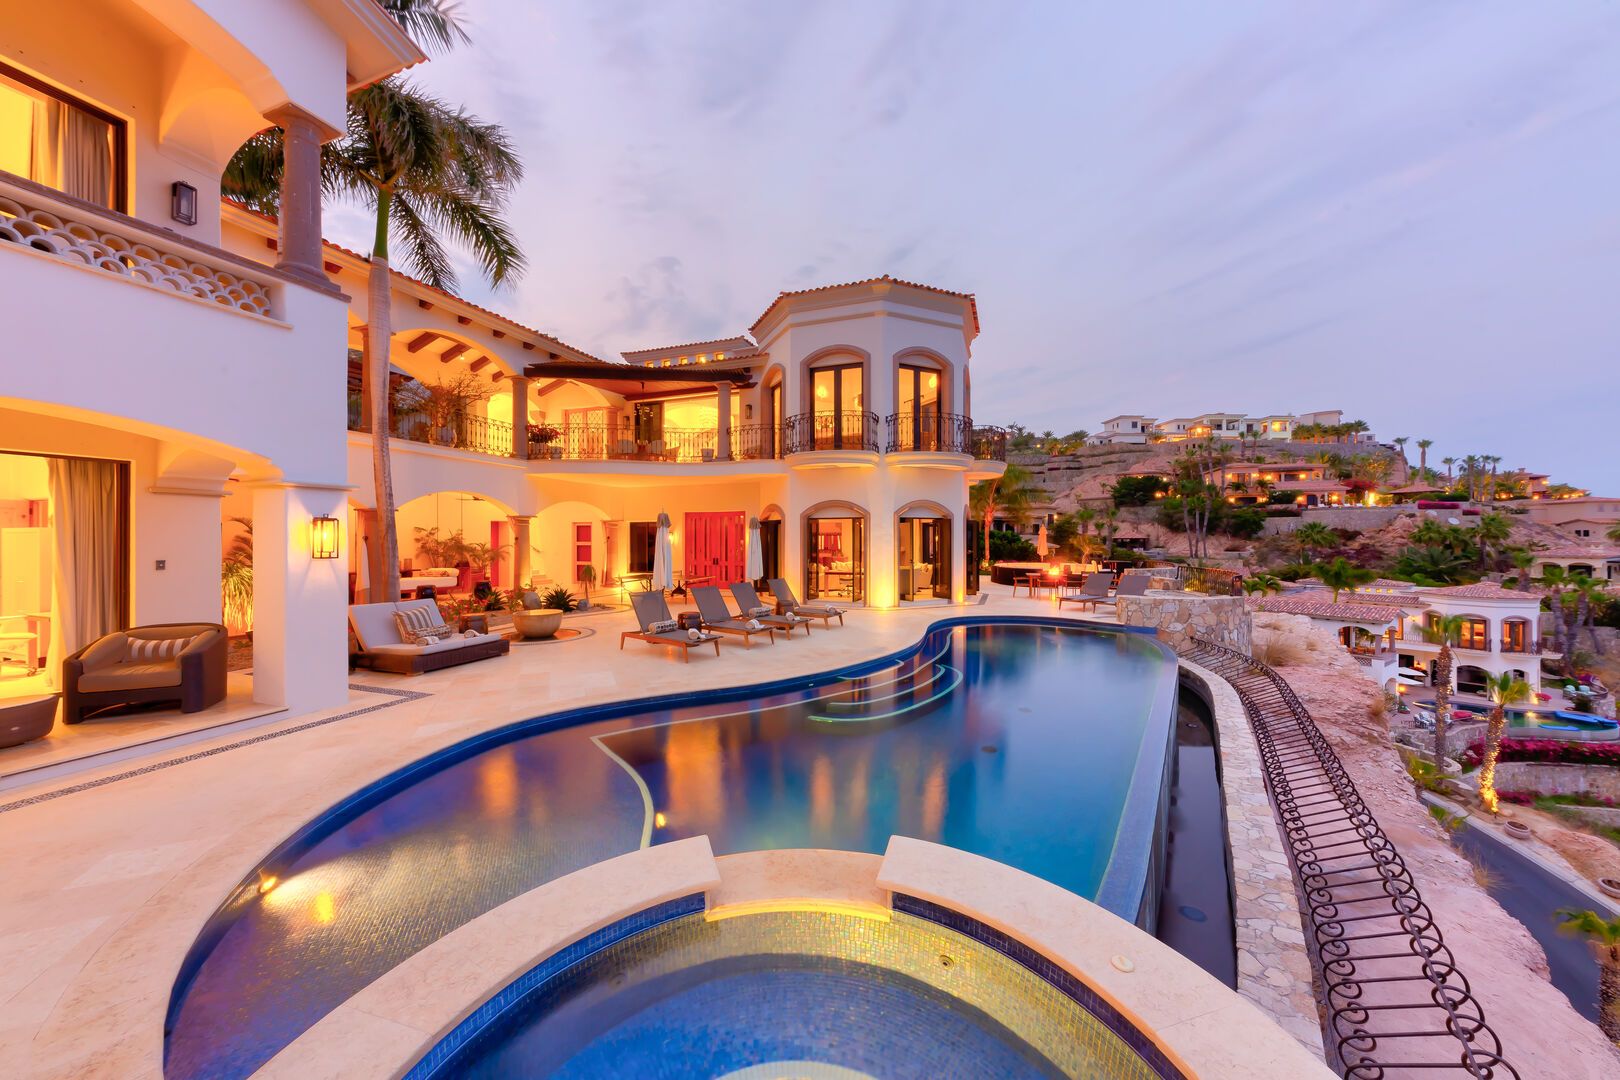 The private infinity pool at Hacienda 502 in Los Cabos